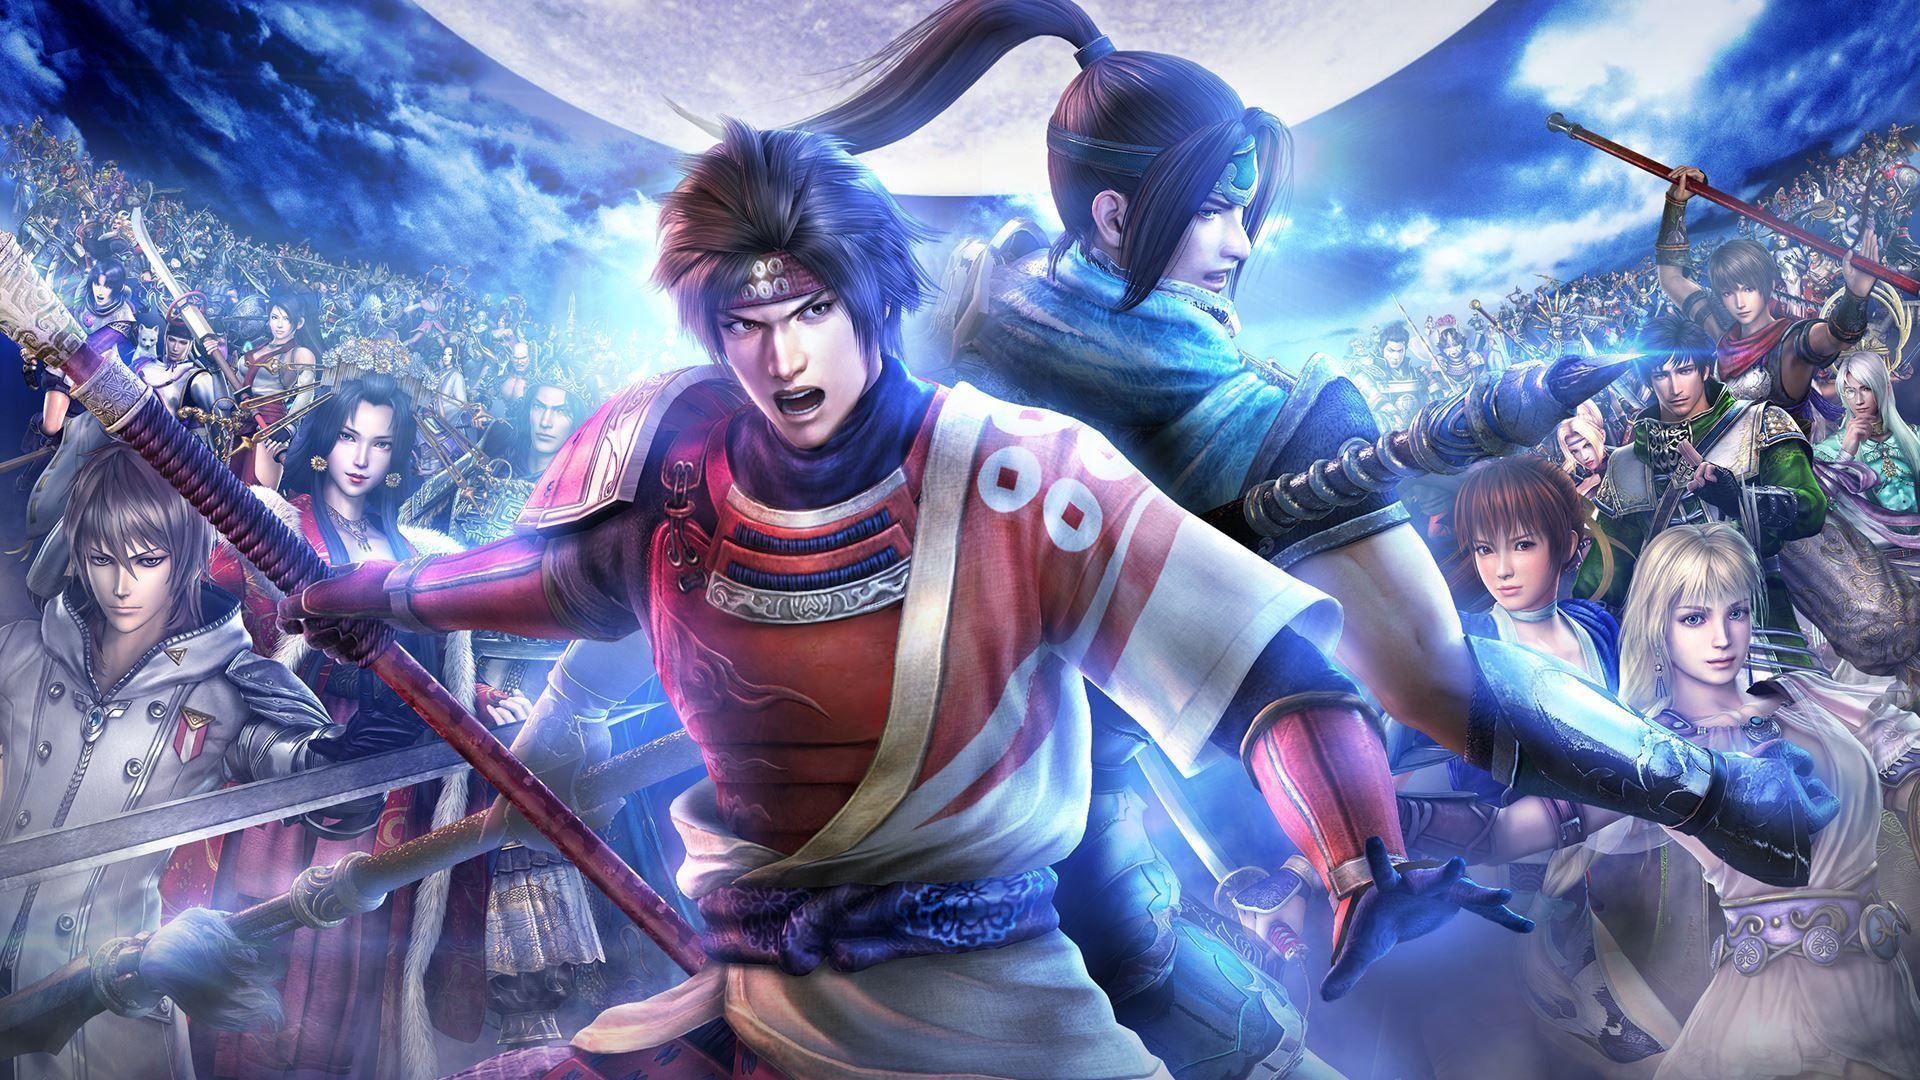 Grab Warriors Orochi Ultimate and Spelunky today on Xbox Games